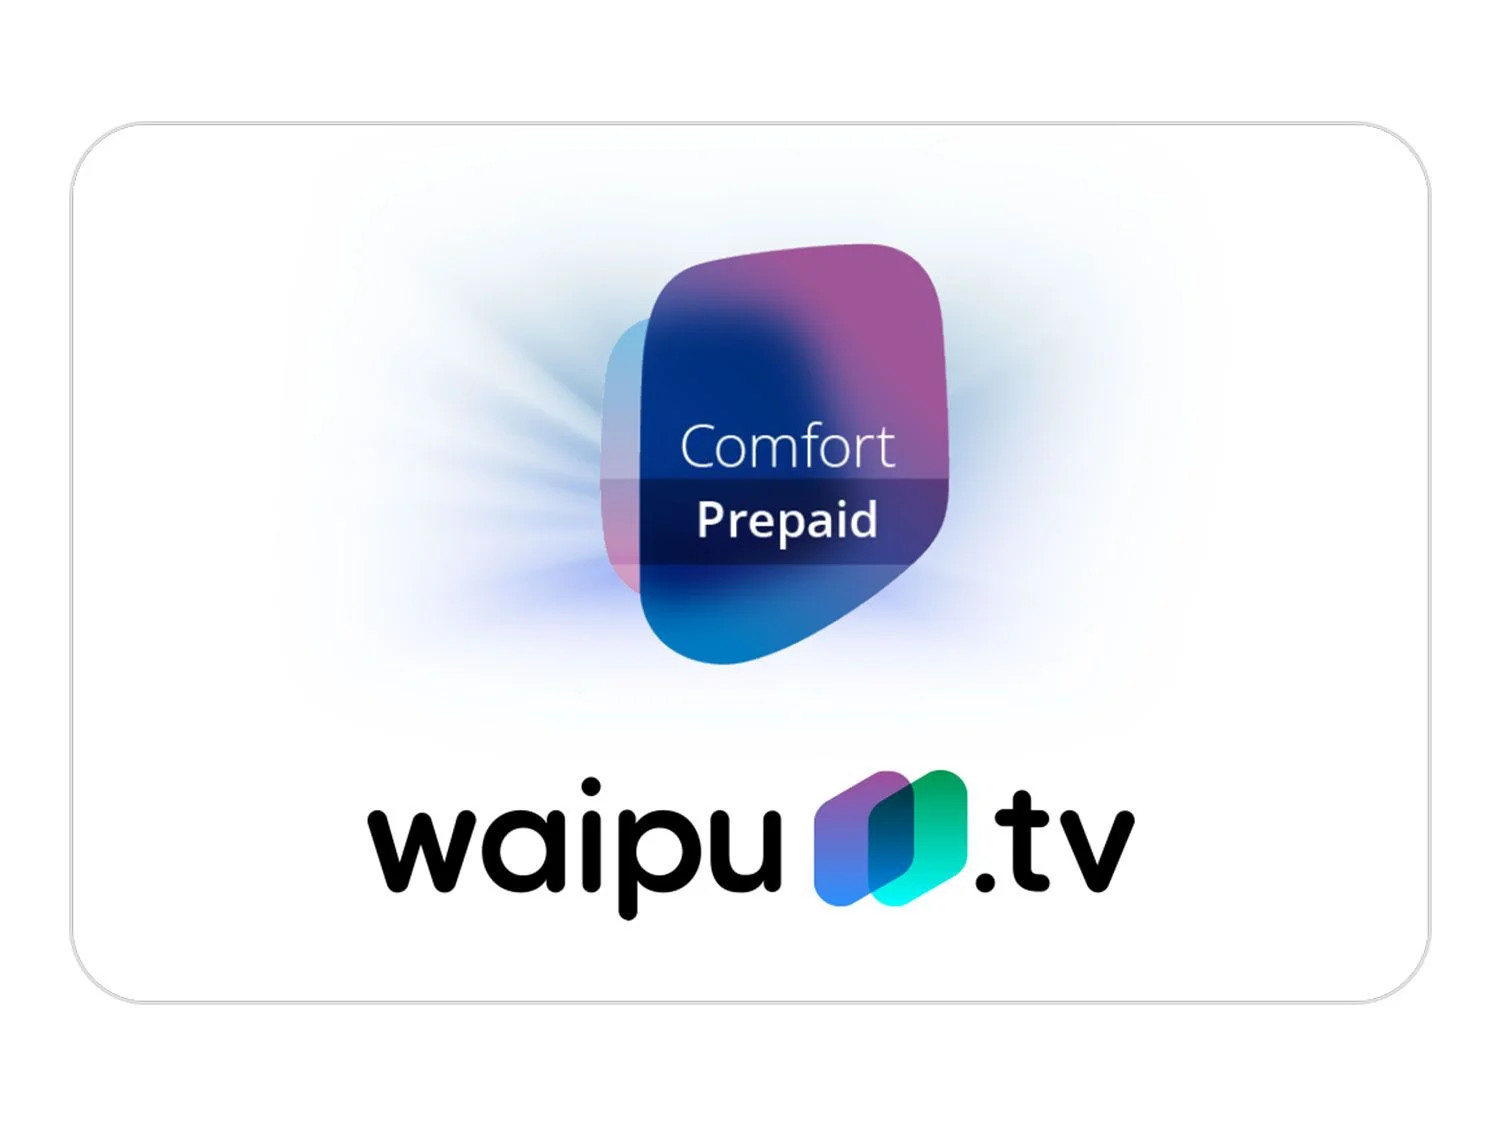 Waipu TV - 6 Months Comfort Subscription DE (ONLY FOR NEW ACCOUNTS), 27.12$